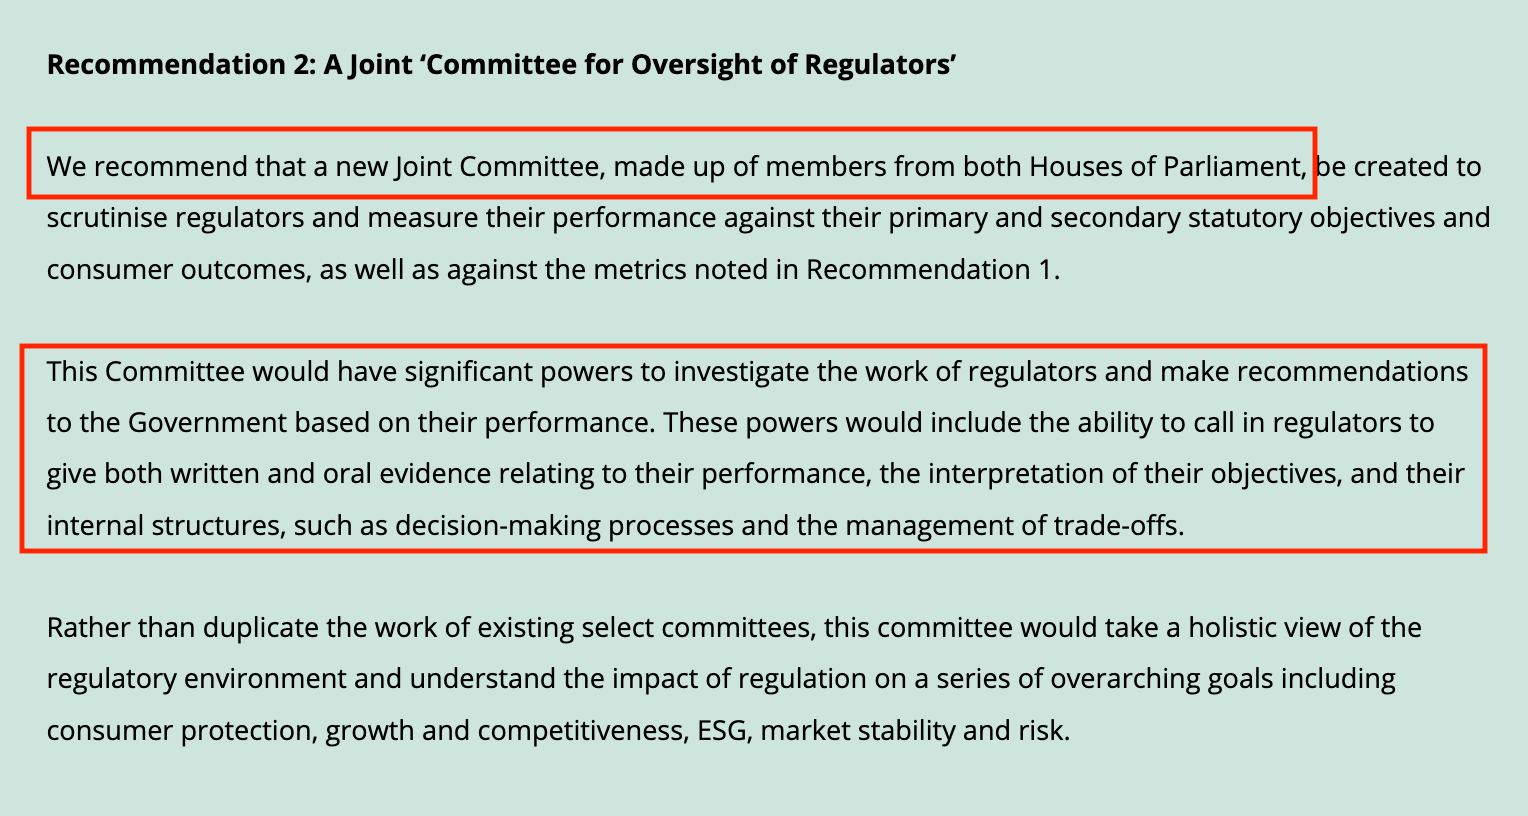 EXTRACT FROM WPI PROPOSAL REVEALING PLANS TO TAKE CONTROL OVER REGULATORS.